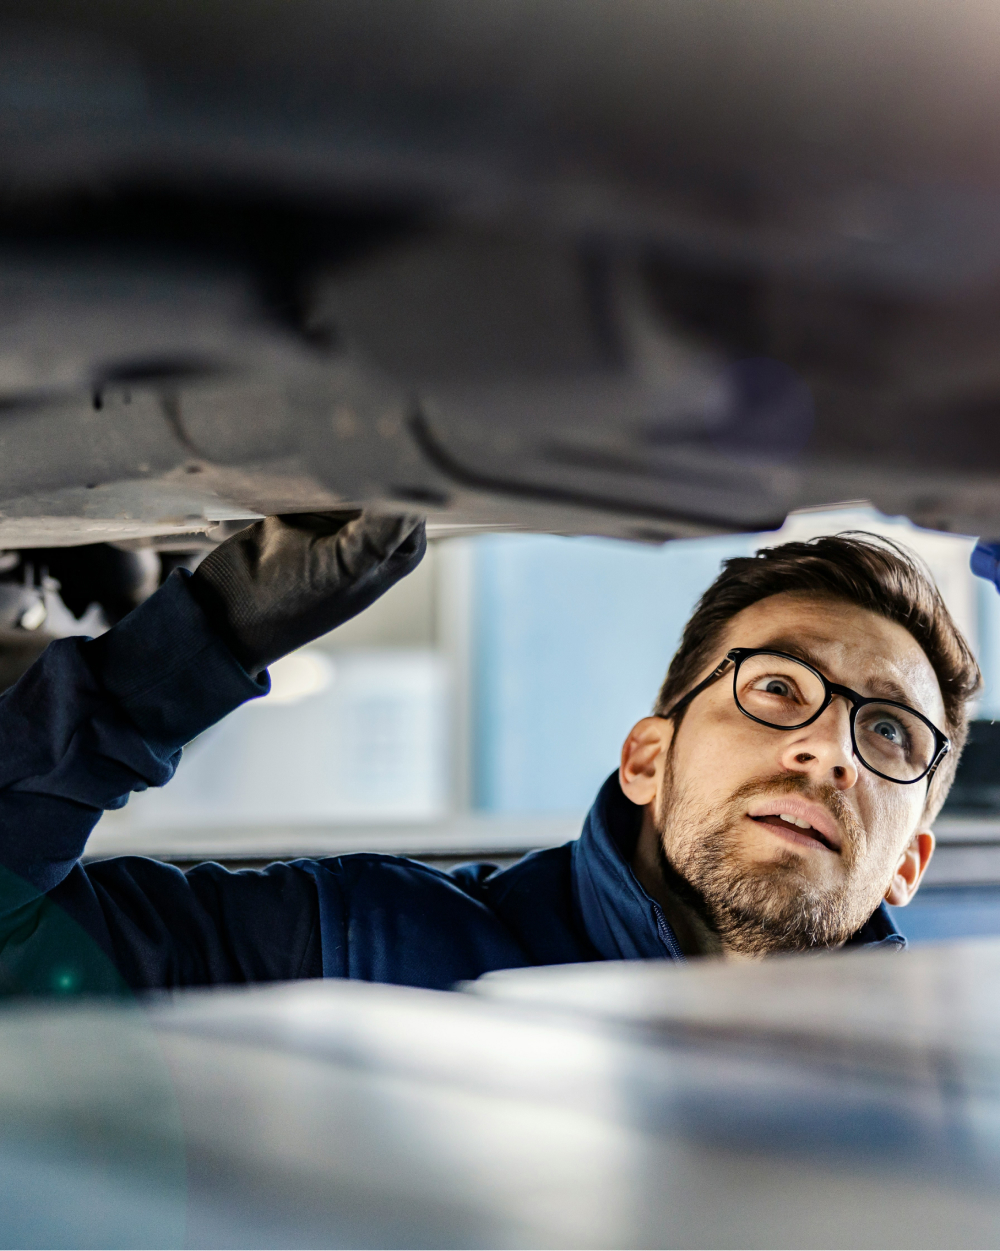 Close-up of a man inspecting the underside of a car.